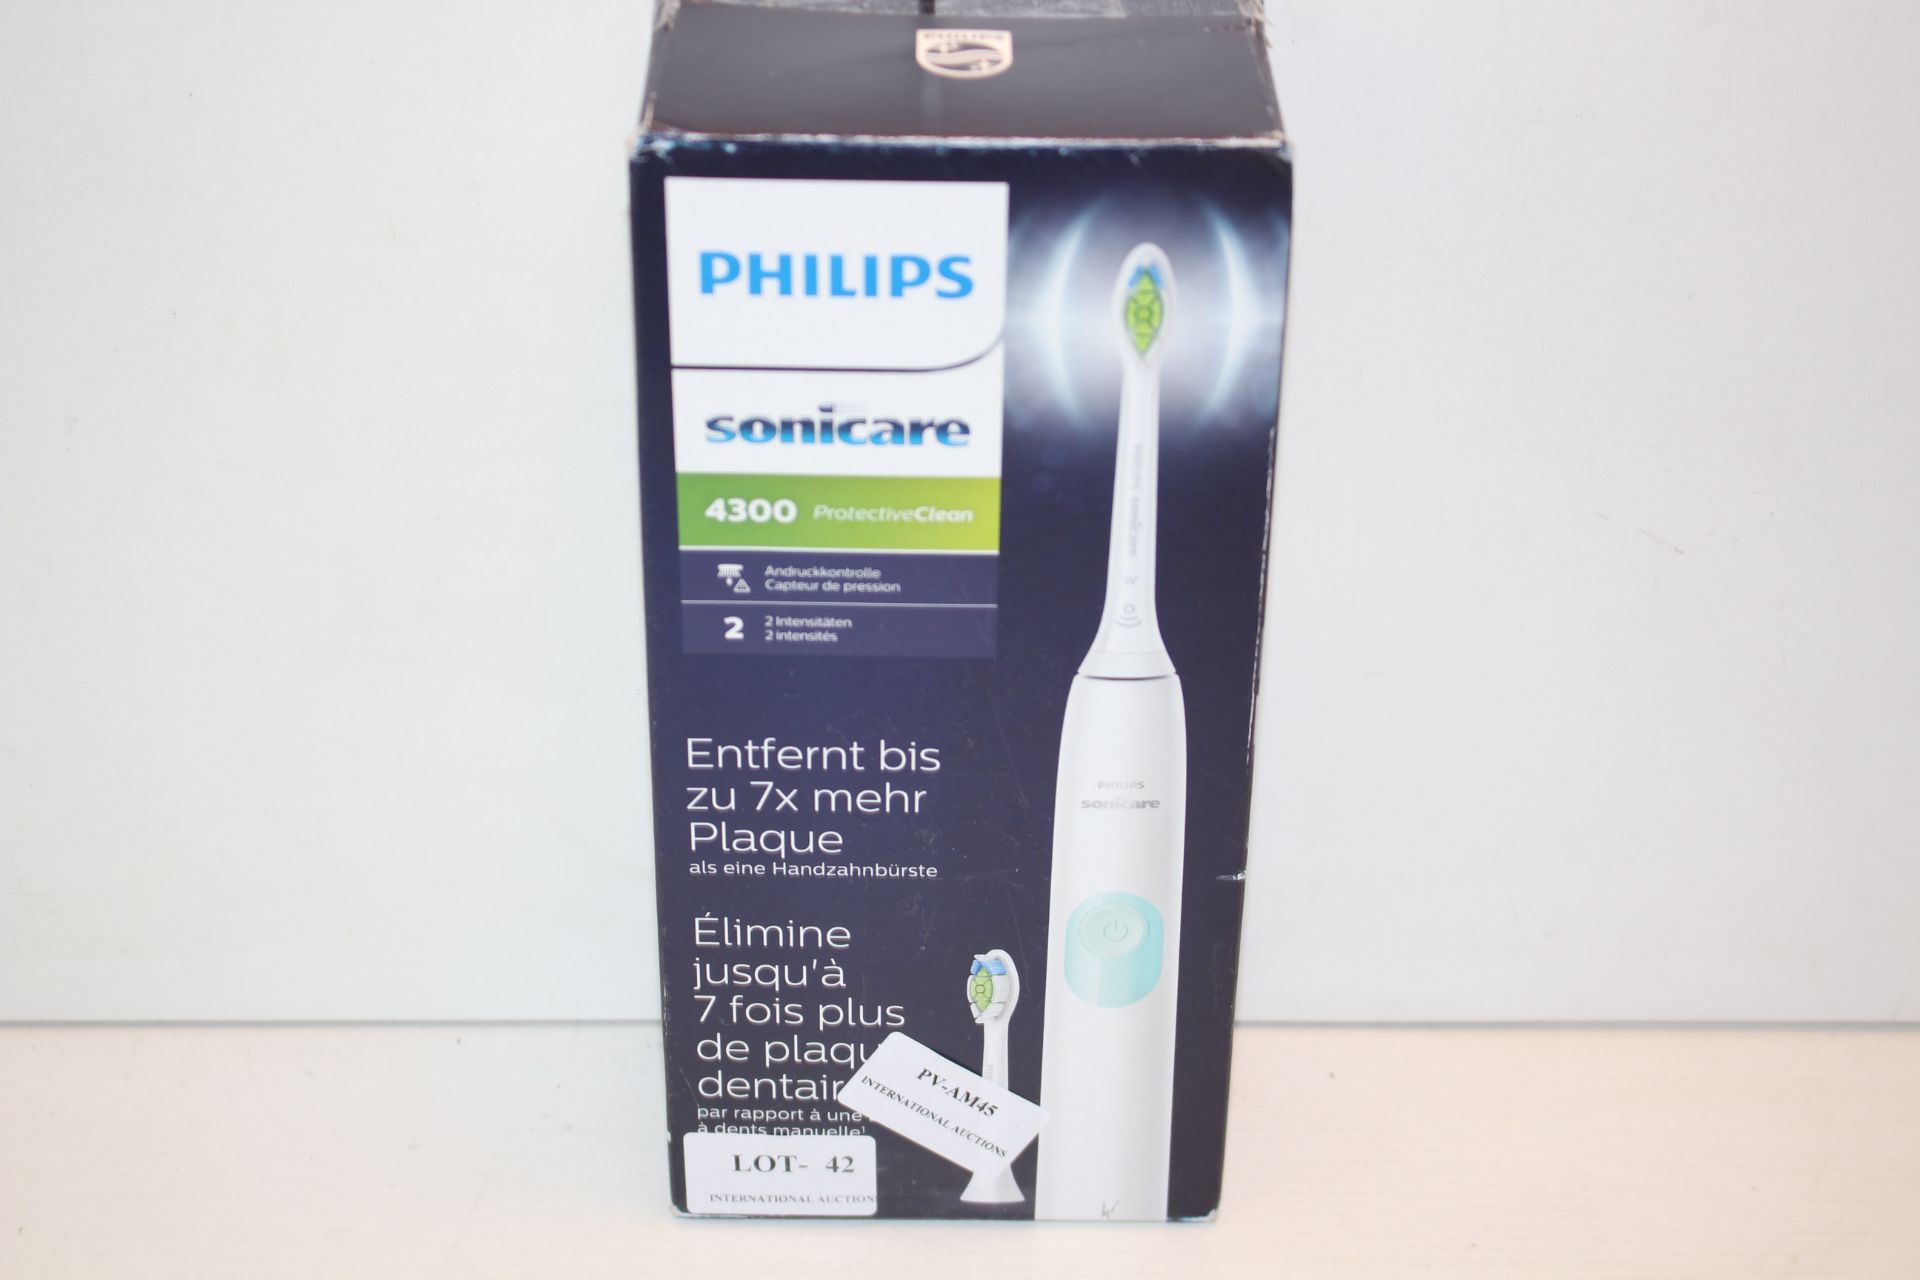 BOXED PHILIPS SONICARE 4300 PROTECTIVE CLEAN C2 TOOTHBRUSH RRP £49.99Condition ReportAppraisal